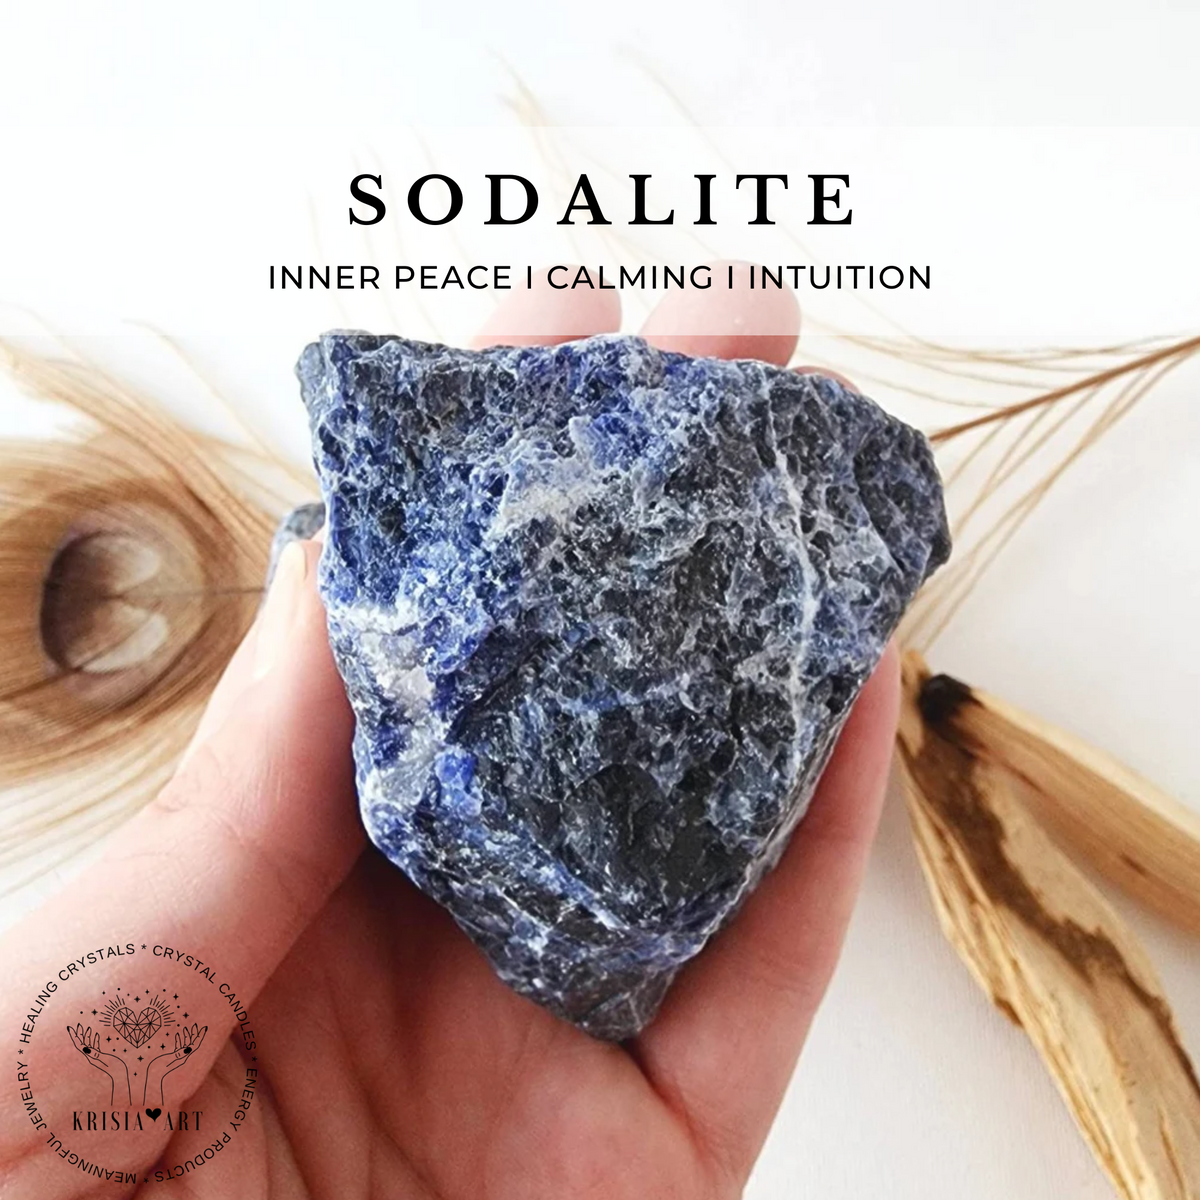 Large SODALITE raw stone for inner peace, calming, intuition reiki healing throat chakra meditation